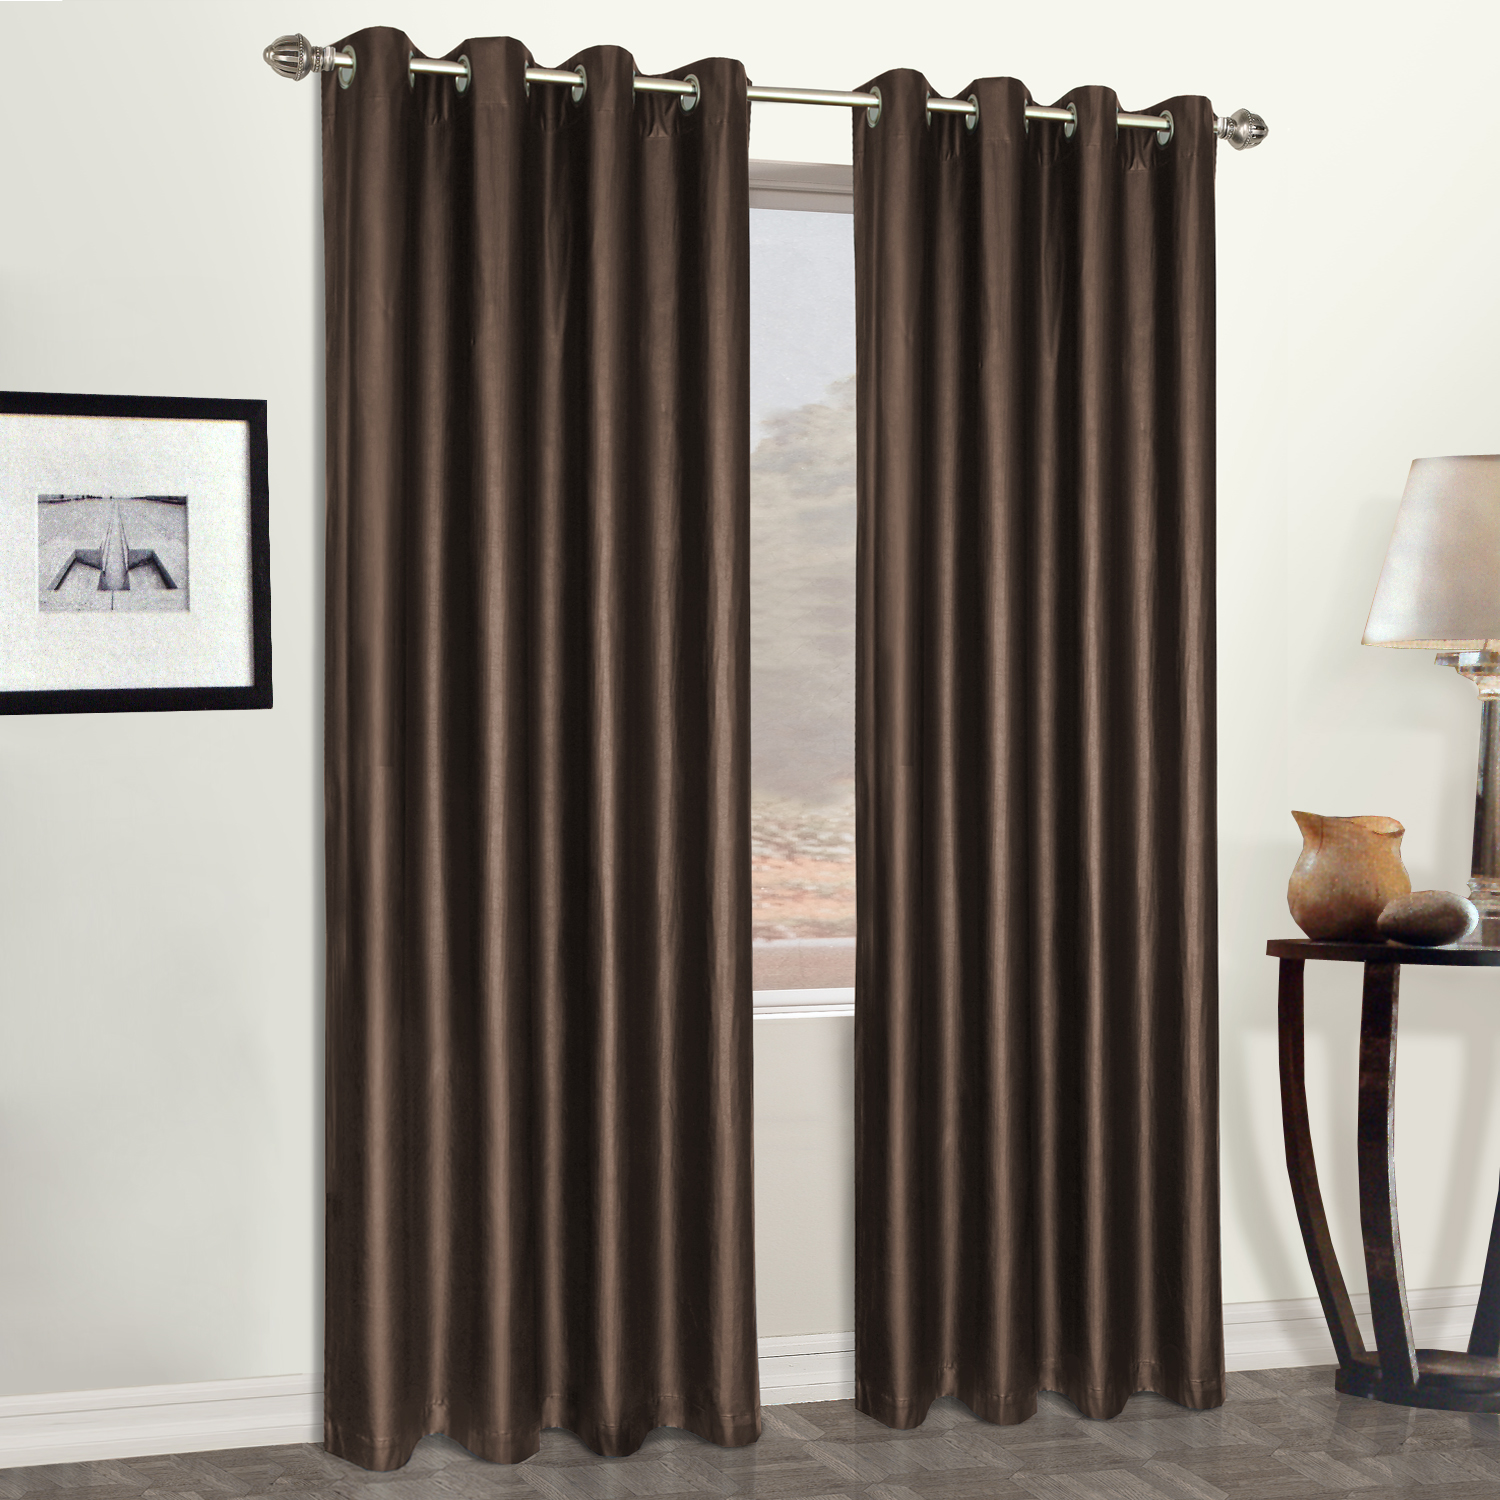 Faux Leather 52" x 95" panel with grommet top